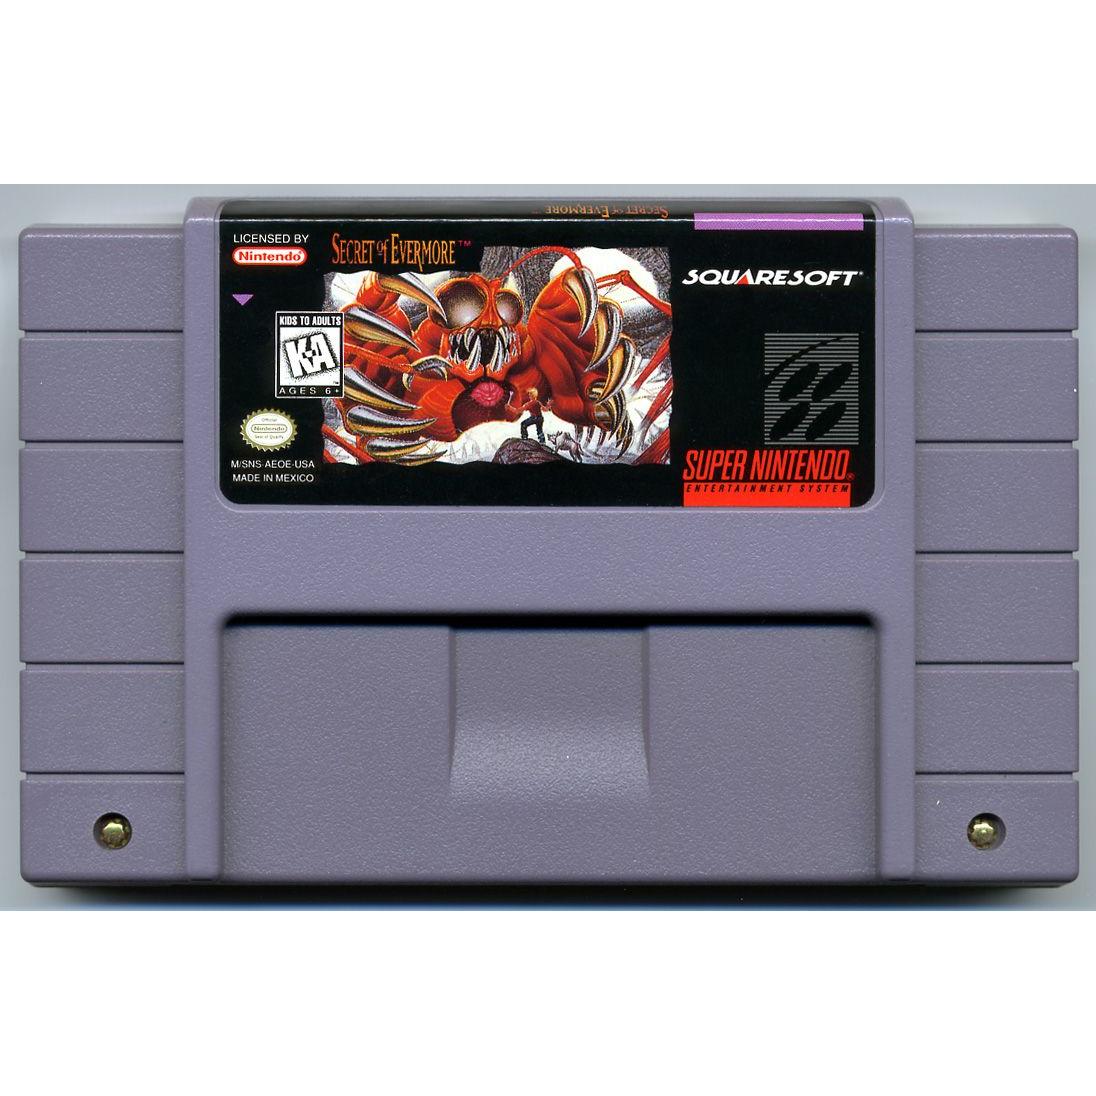 SNES - Secrets of Evermore (Cartridge Only)